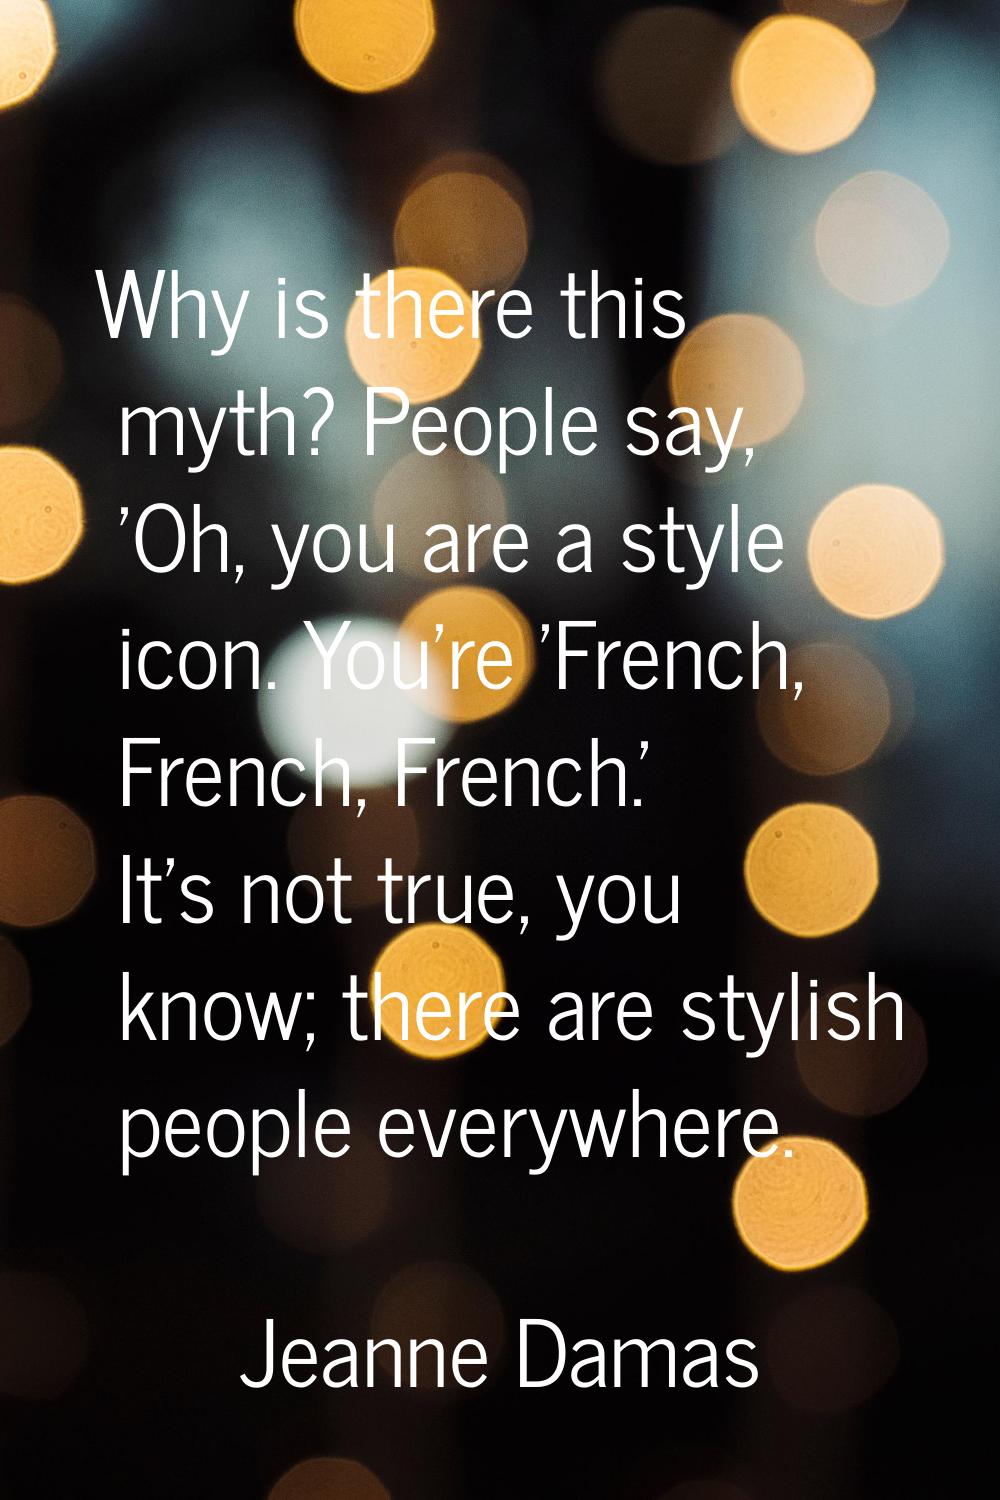 Why is there this myth? People say, 'Oh, you are a style icon. You're 'French, French, French.' It'